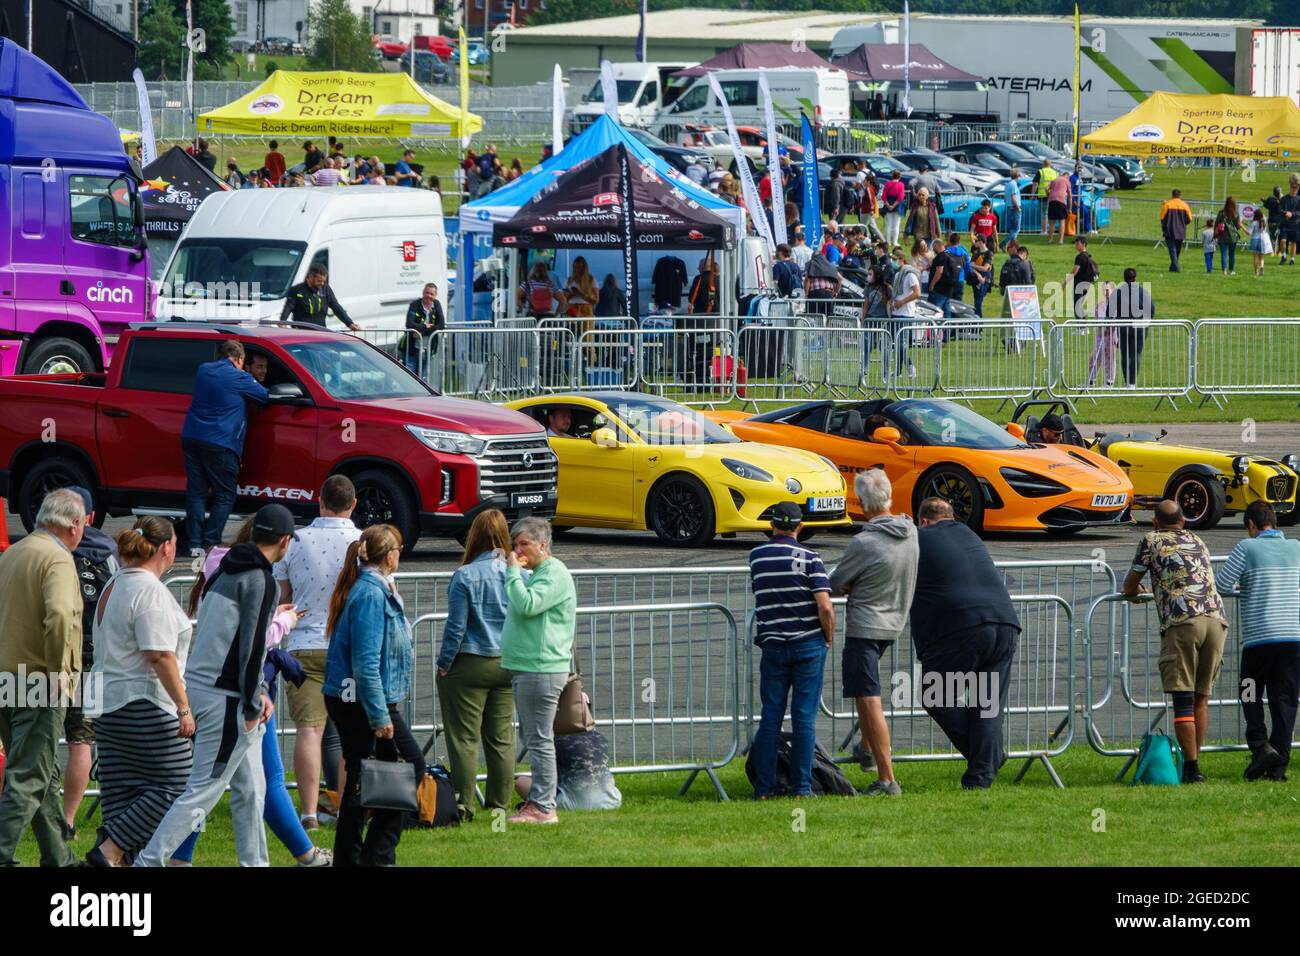 Farnborough, 19th August, 2021. The British Motor Show opens for a three day exhibition of motorsport, classic cars, electric cars and supercars at Farnborough International Exhibition and Conference Centre. Stock Photo